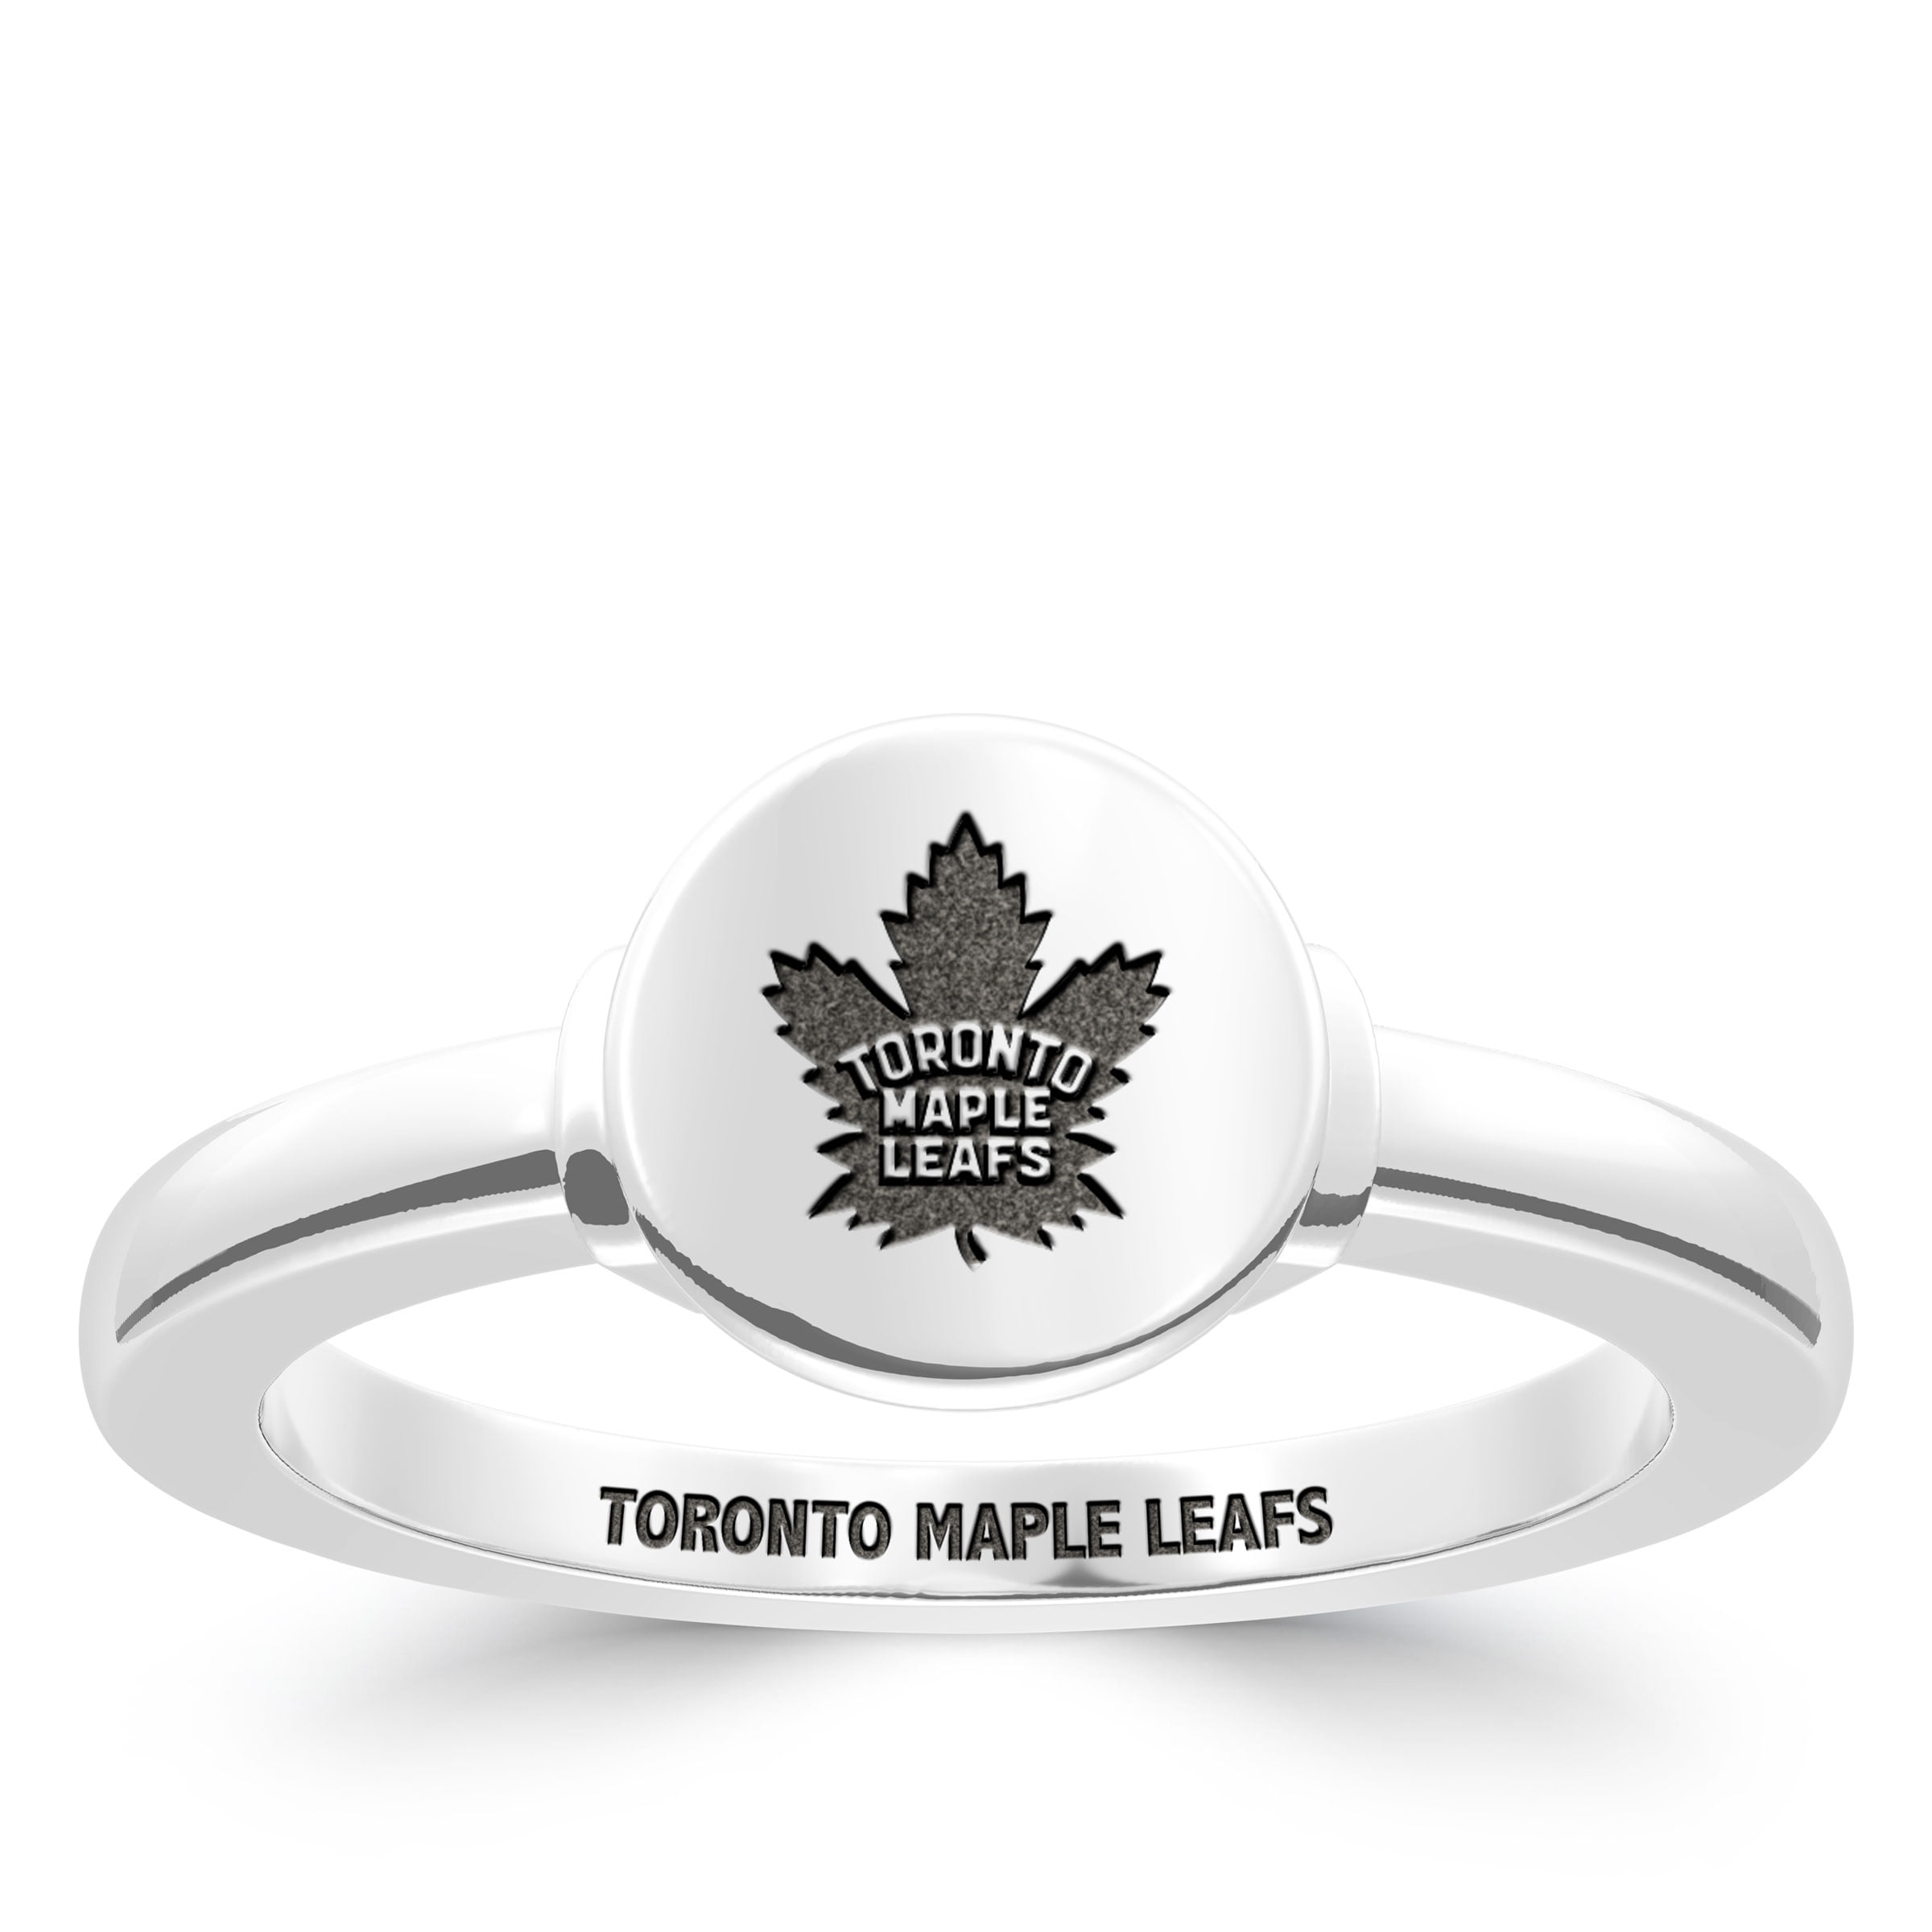 Toronto Maple Leafs Engraved Sterling Silver Signet Ring